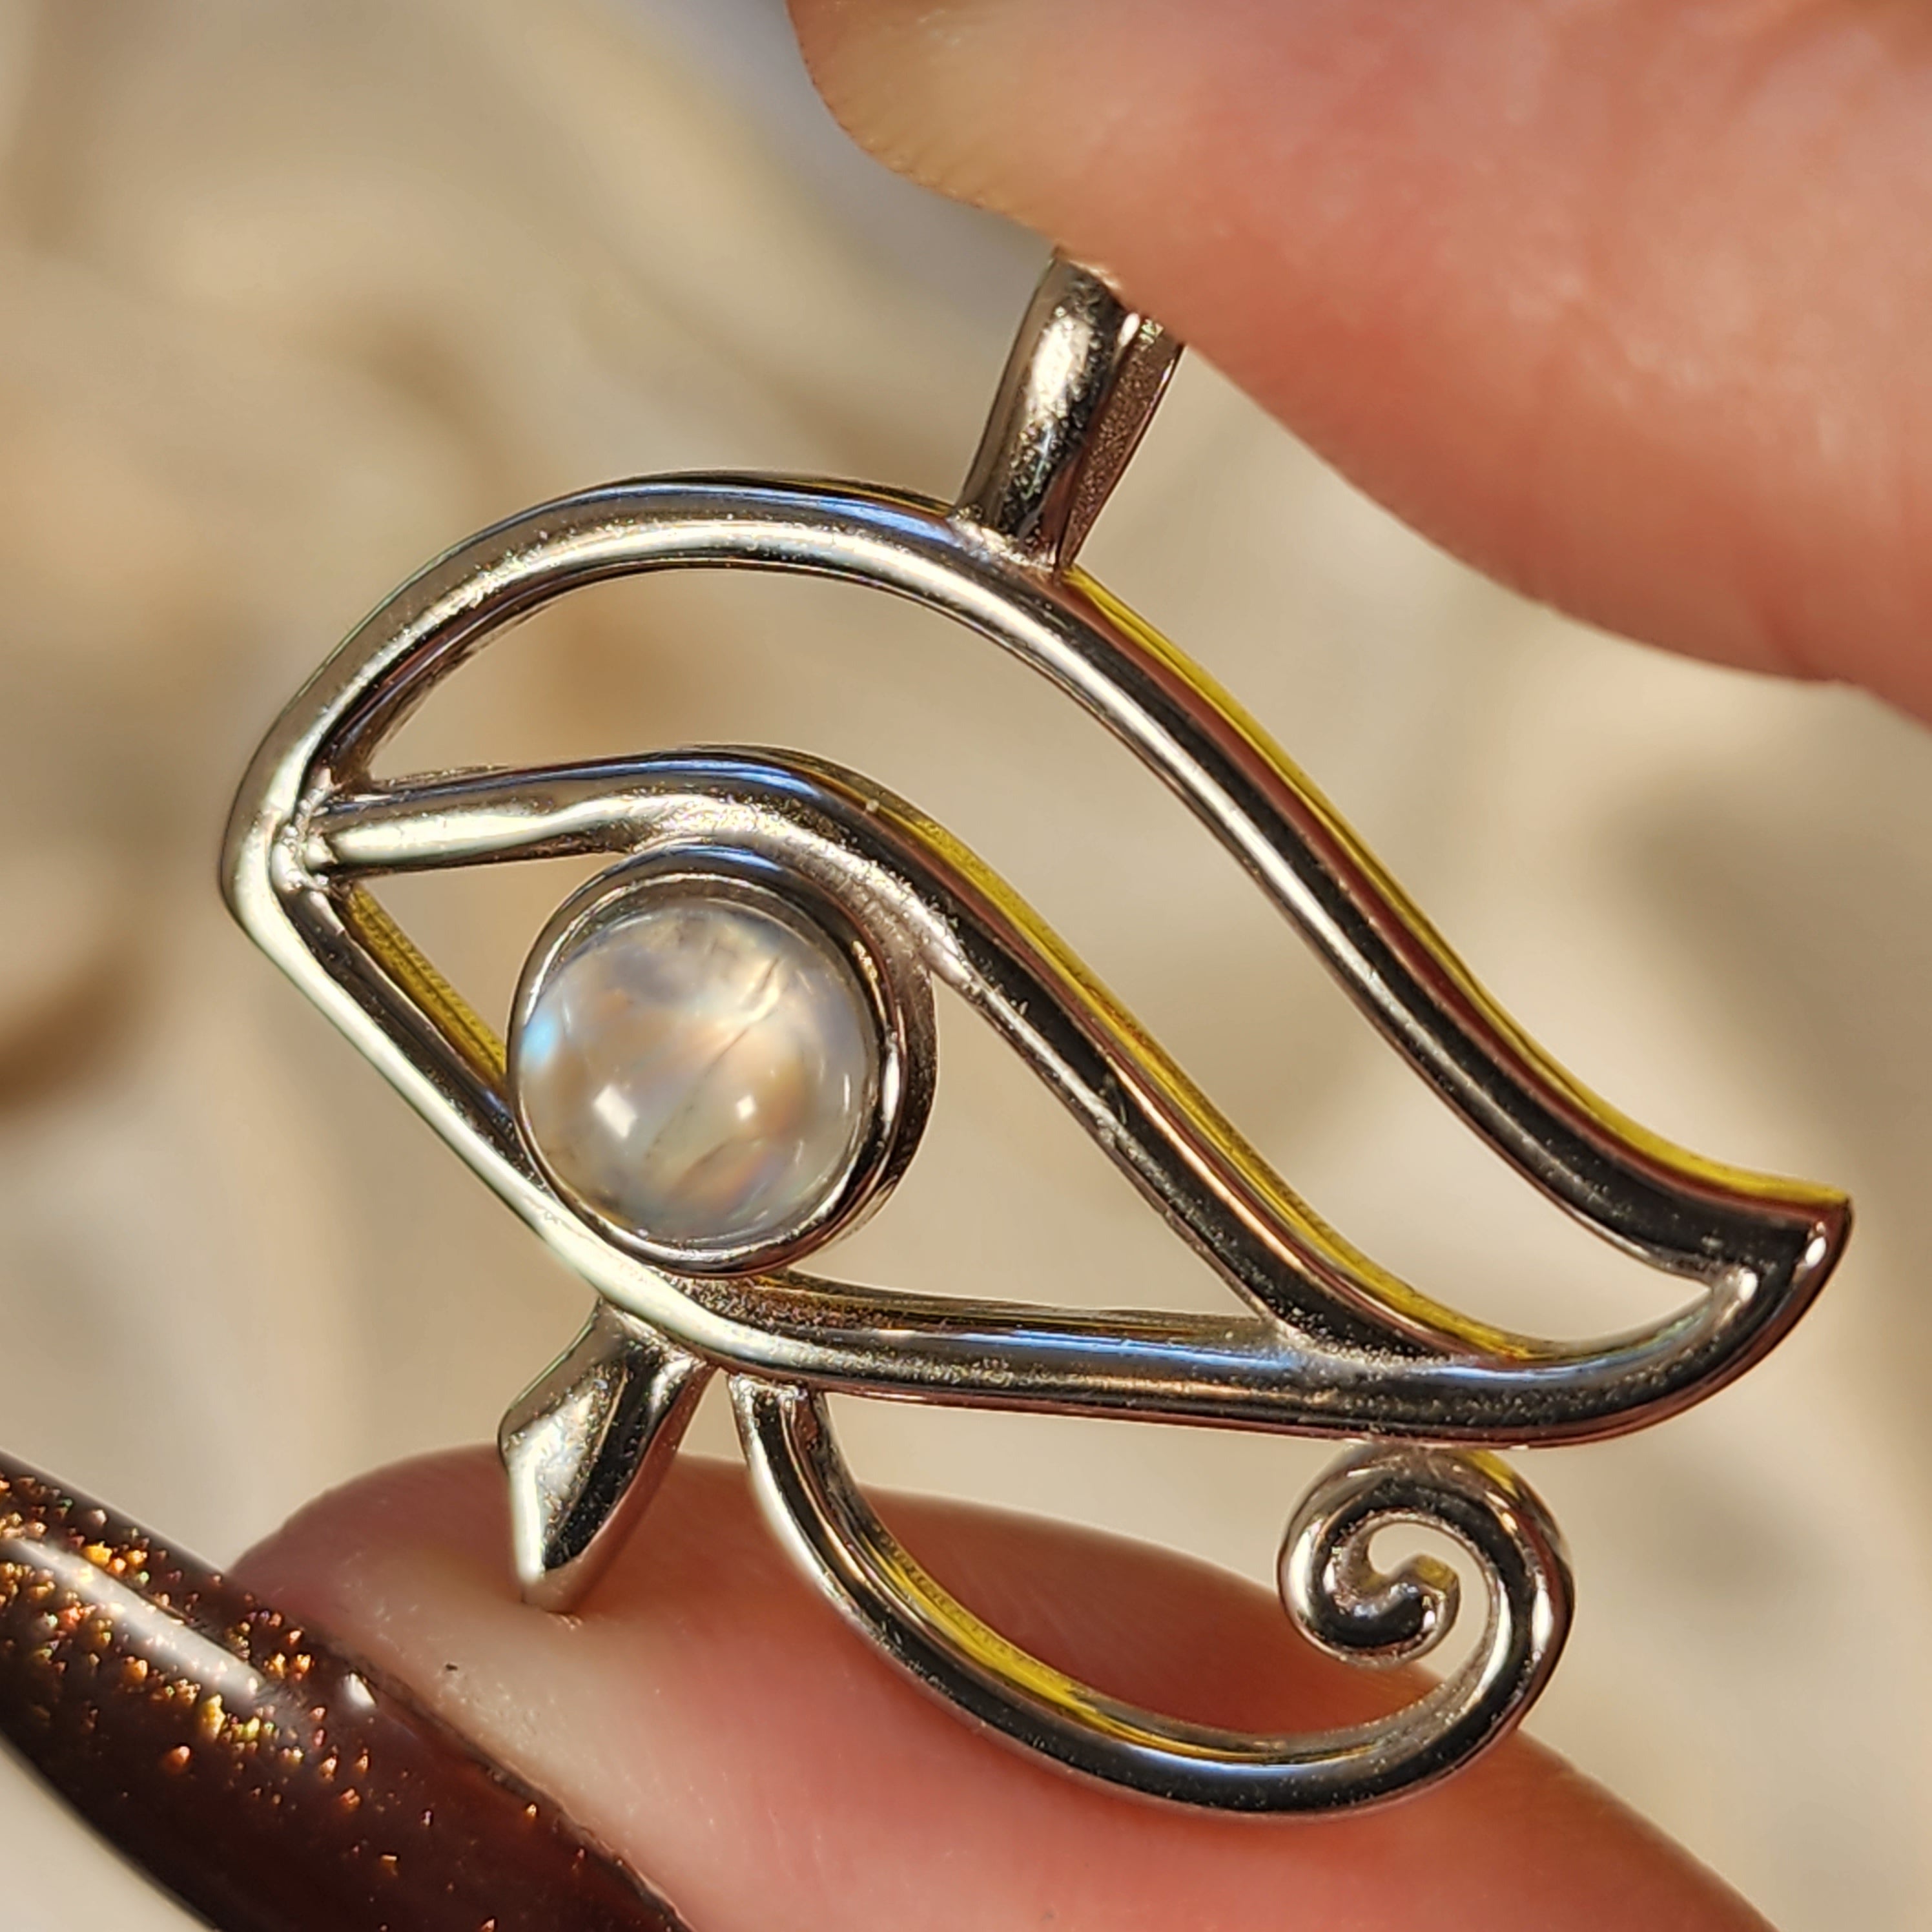 Rainbow Moonstone Eye of Horus Amulet Pendant .925 Silver for New Beginnings, Luck and Health